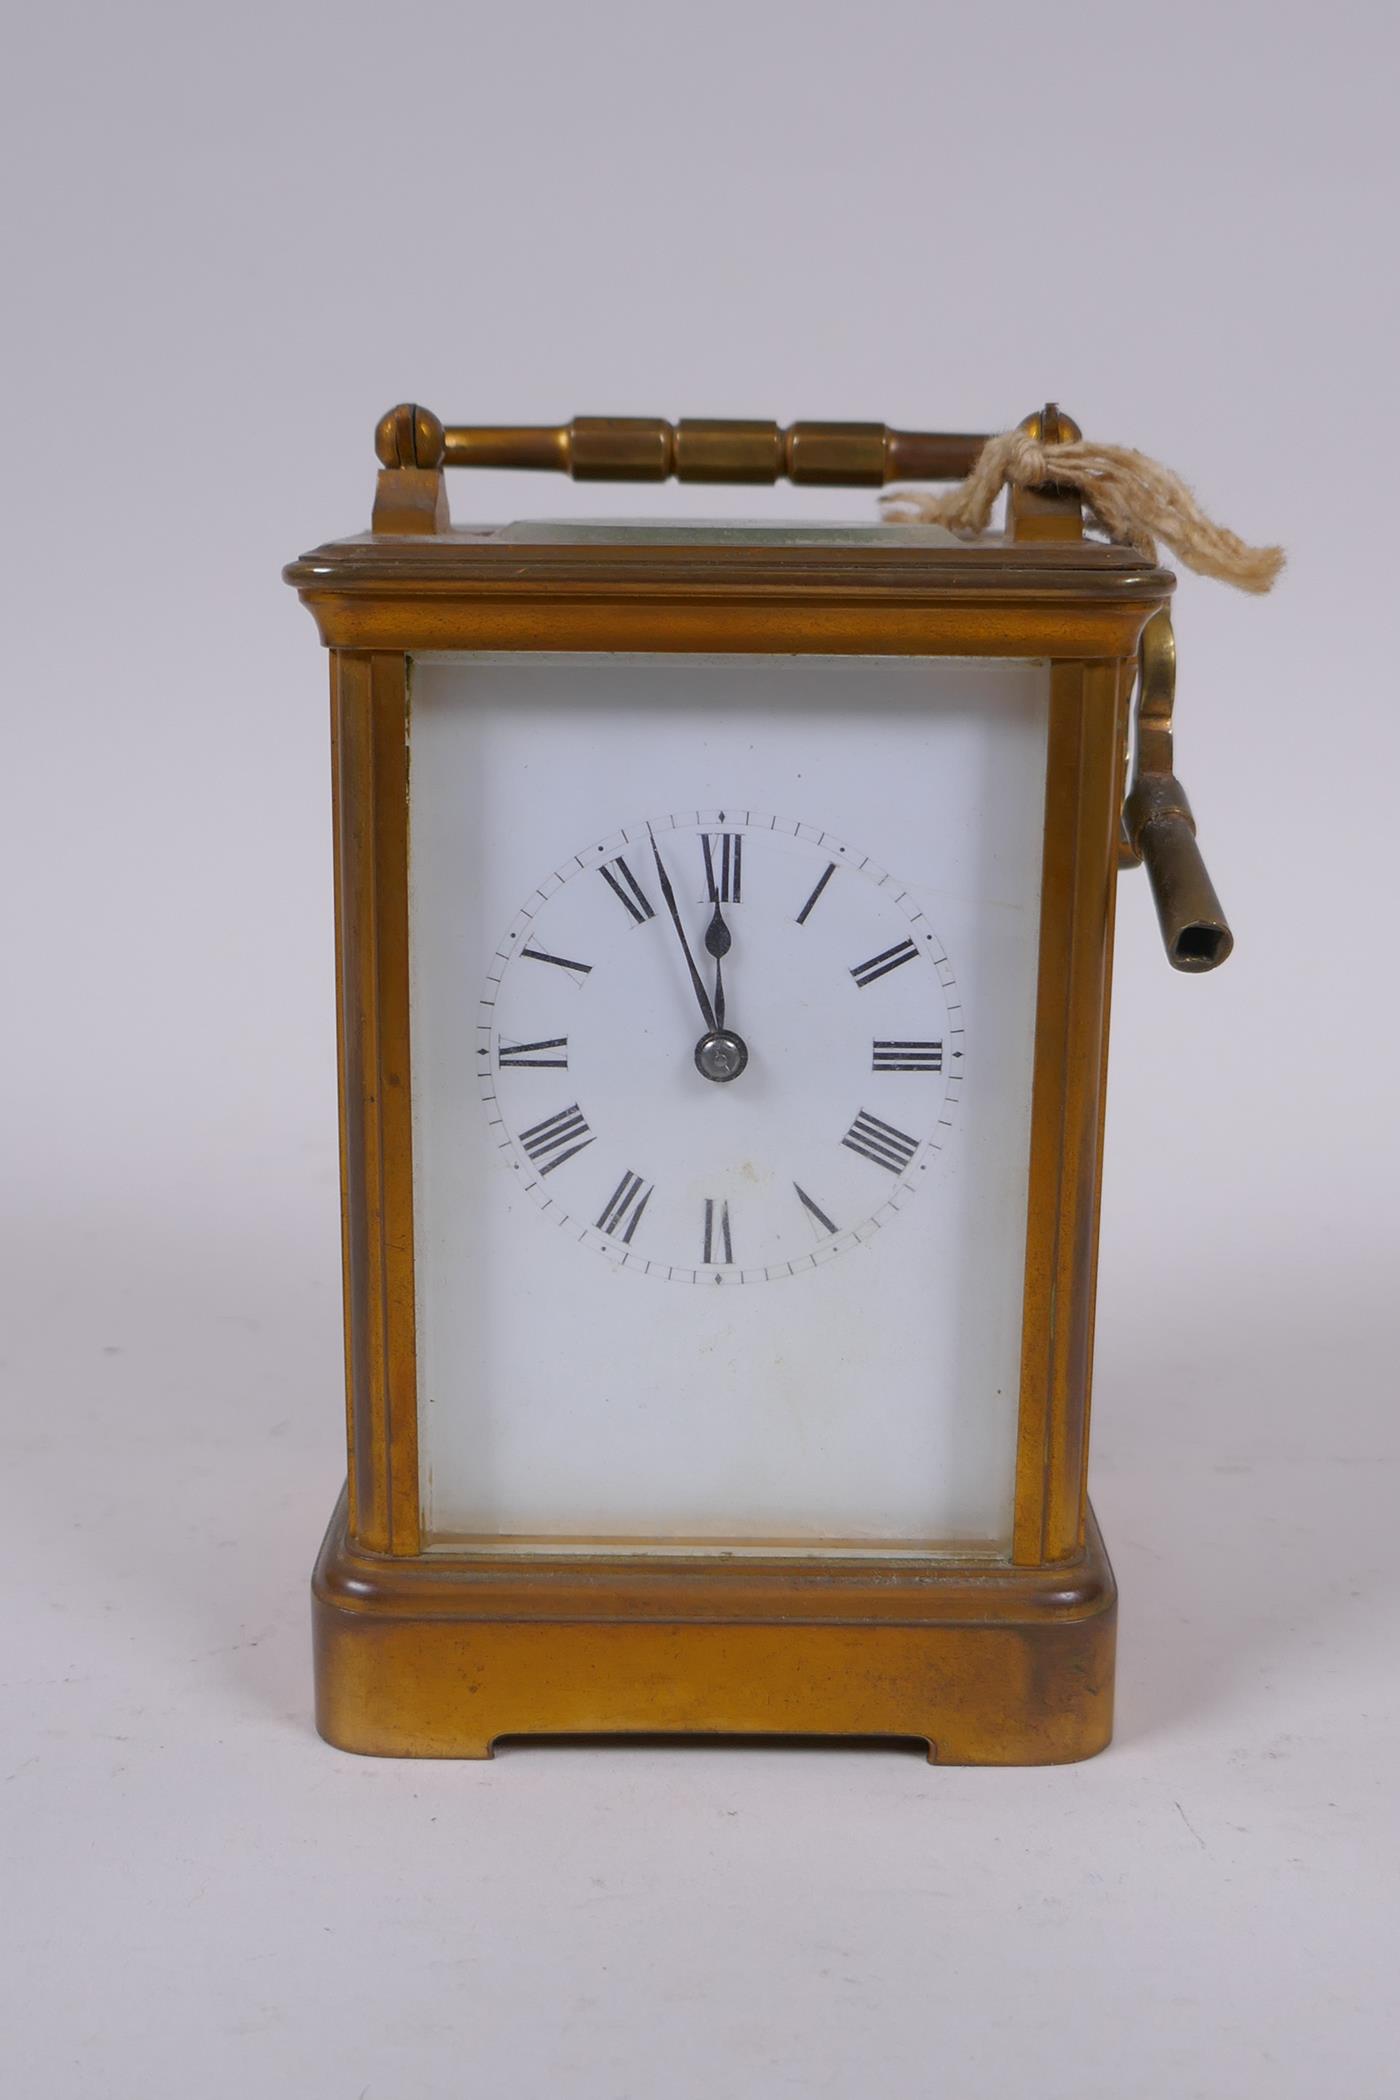 An early C20th French brass carriage clock striking on a gong by Richard & Cie,9 x 8cm, 14cm high